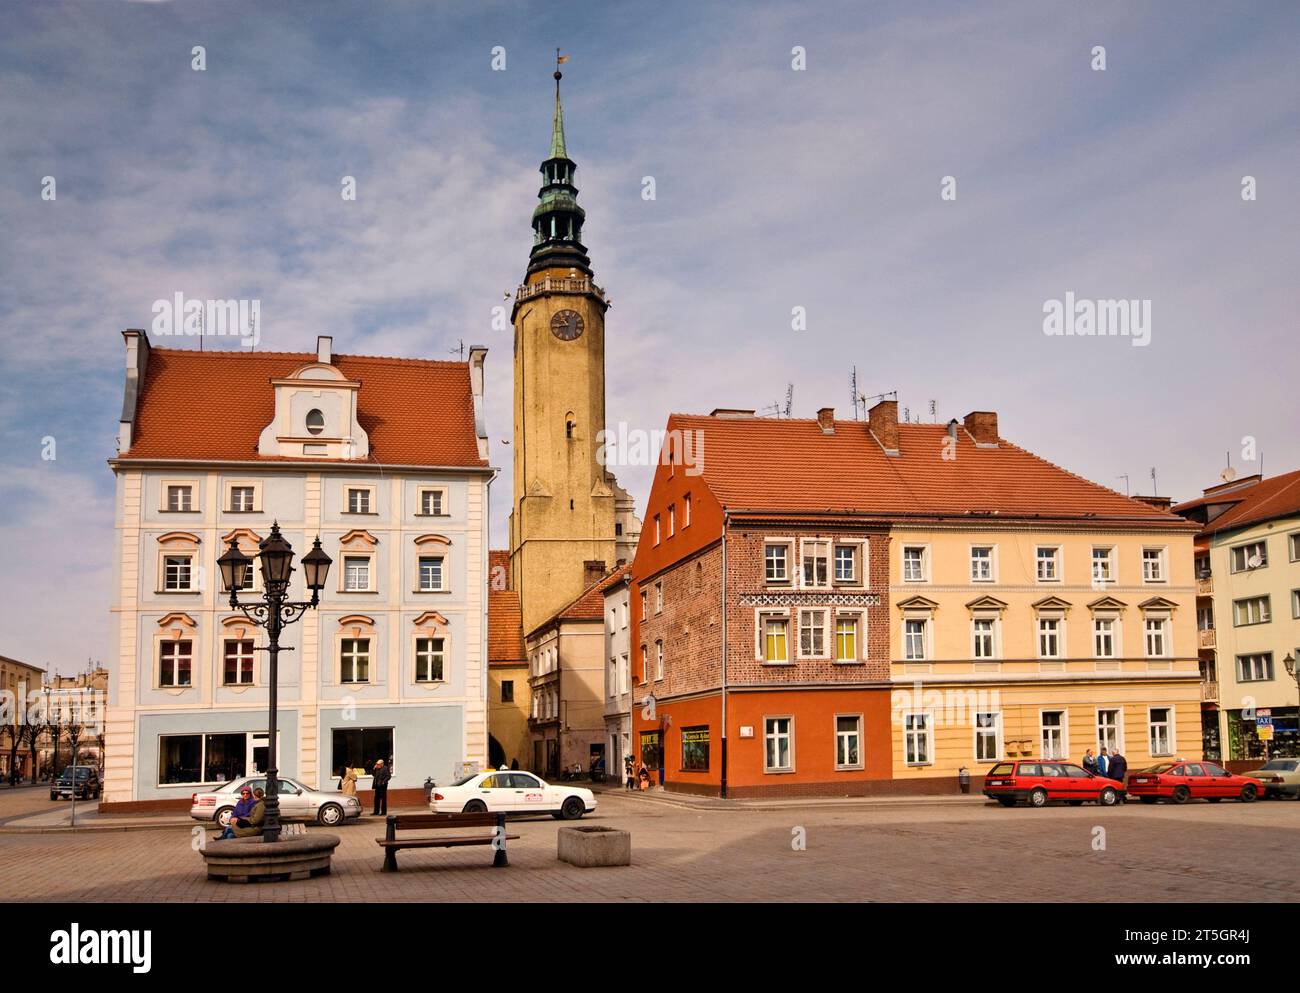 Rynek (Market Square) and tower of Town Hall in Brzeg, Opolskie, Poland Stock Photo